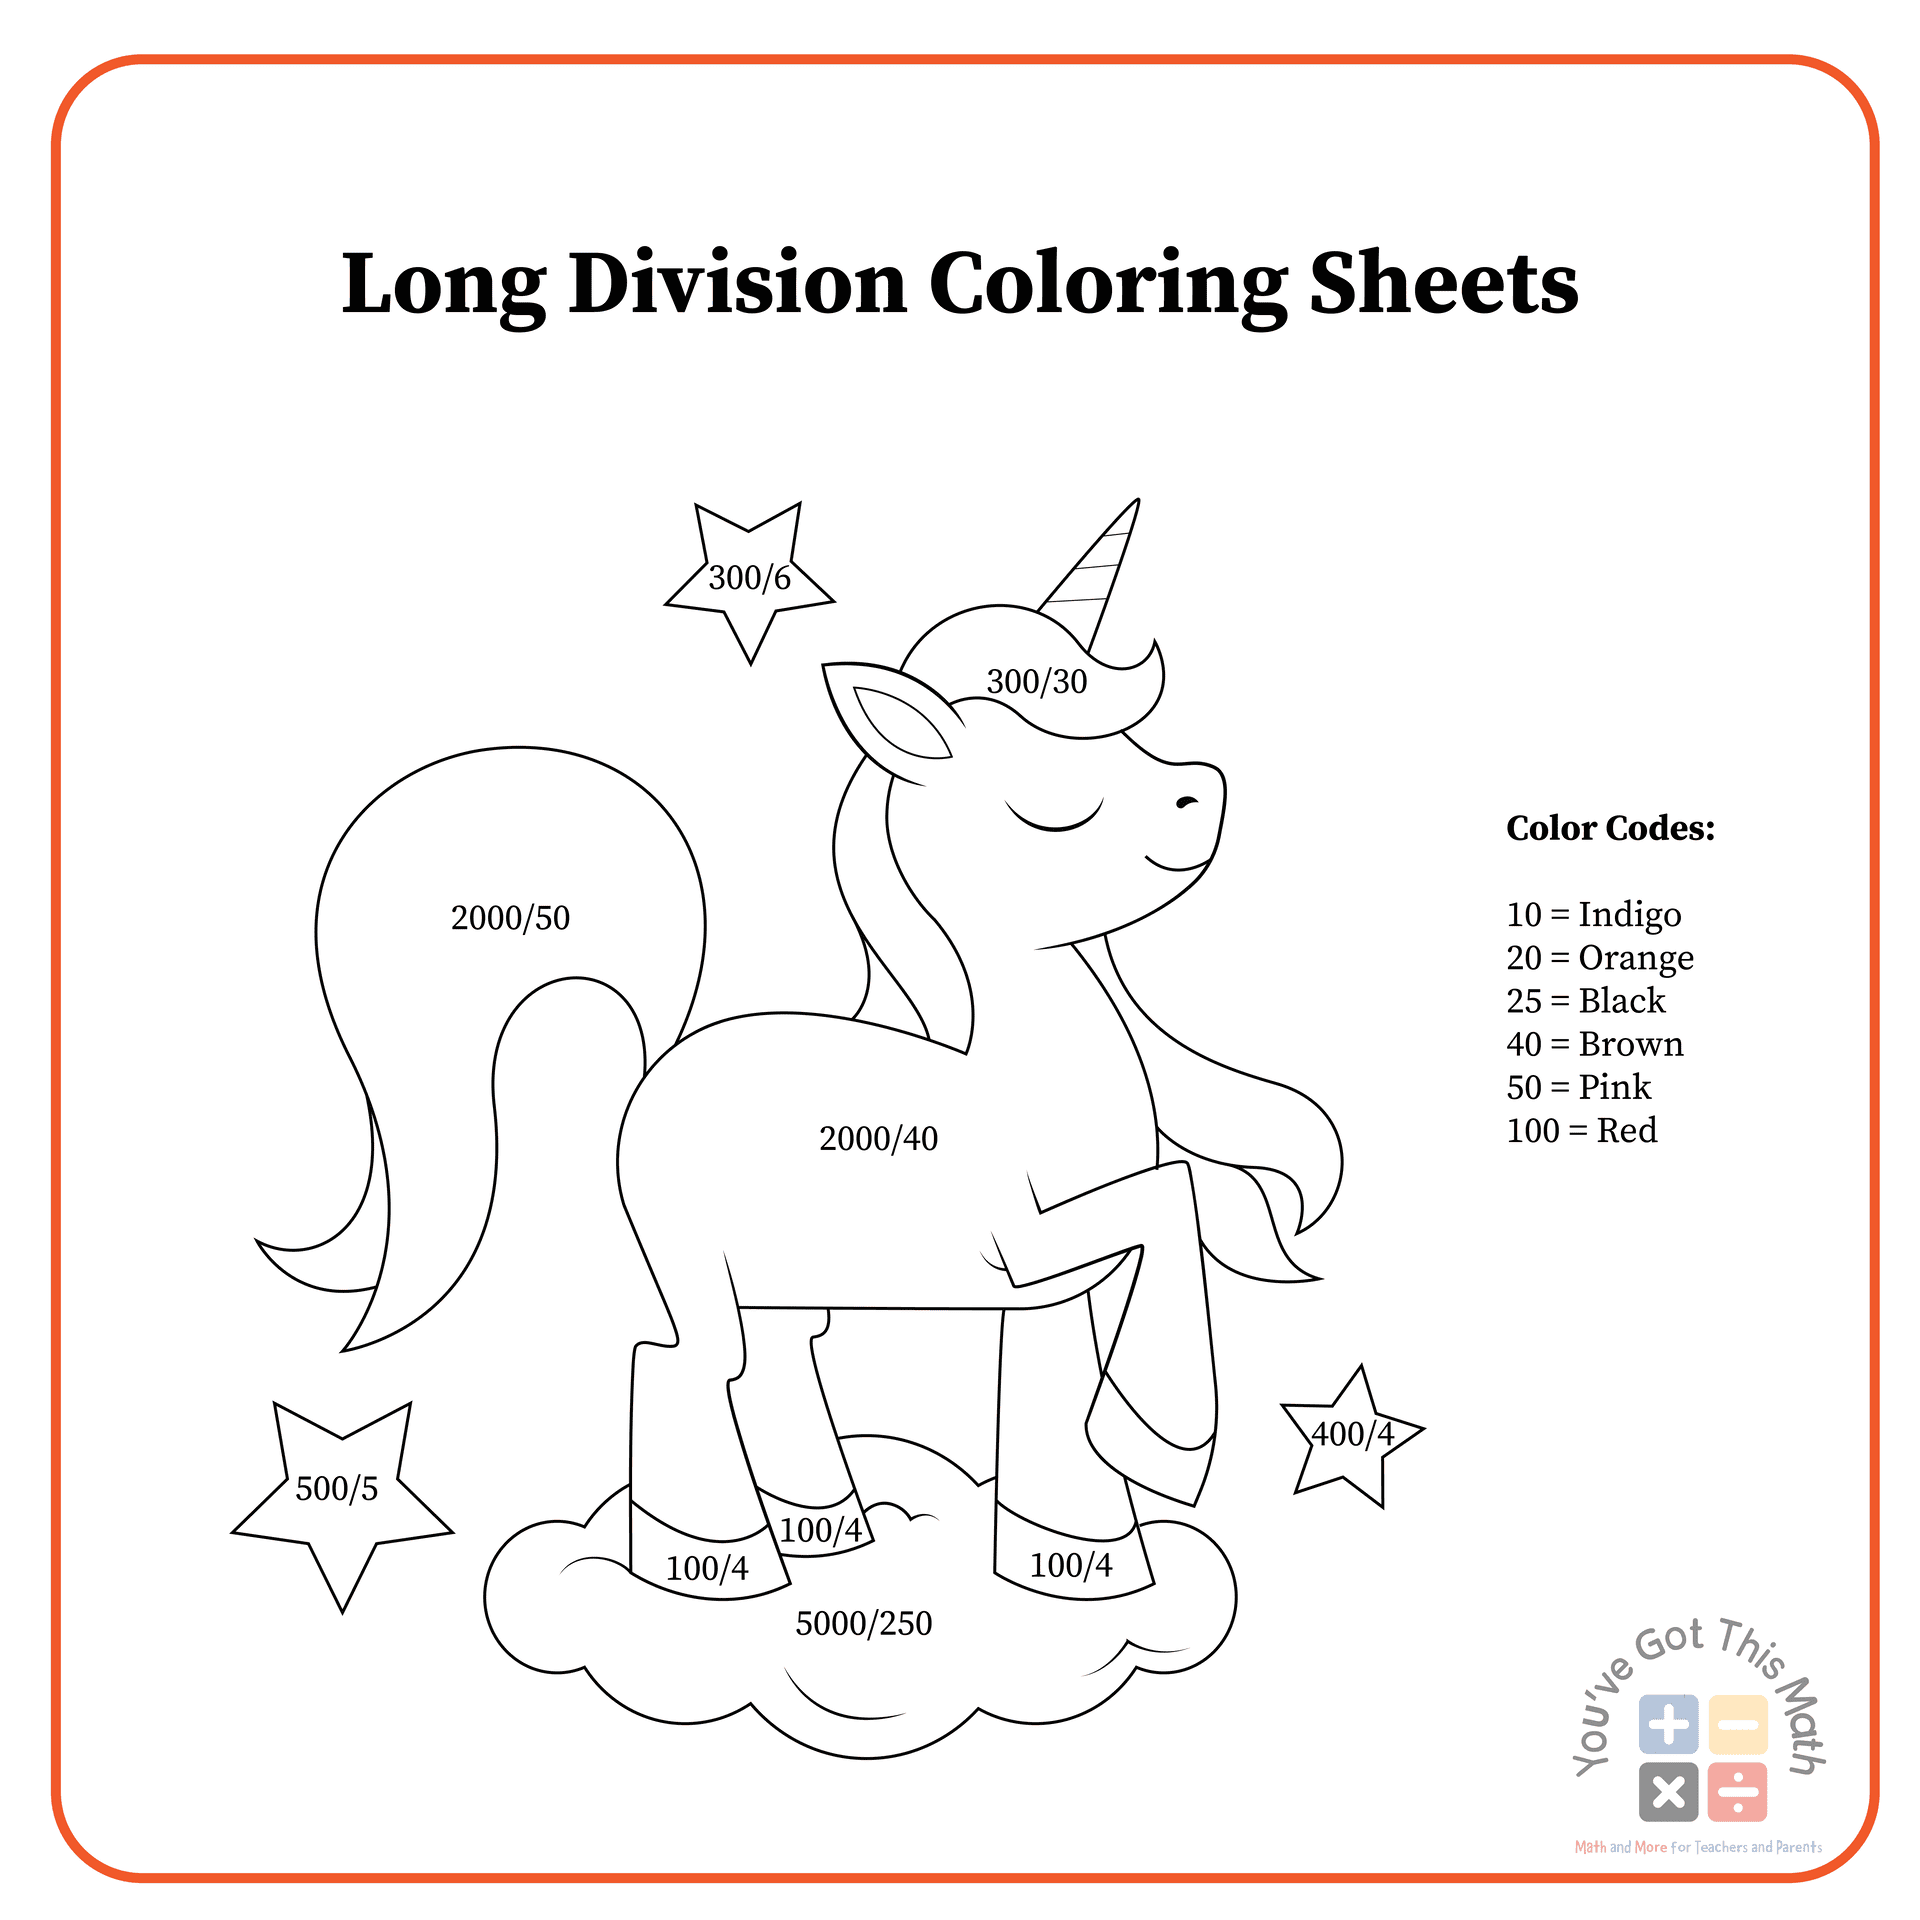 Long Division in Division coloring worksheets